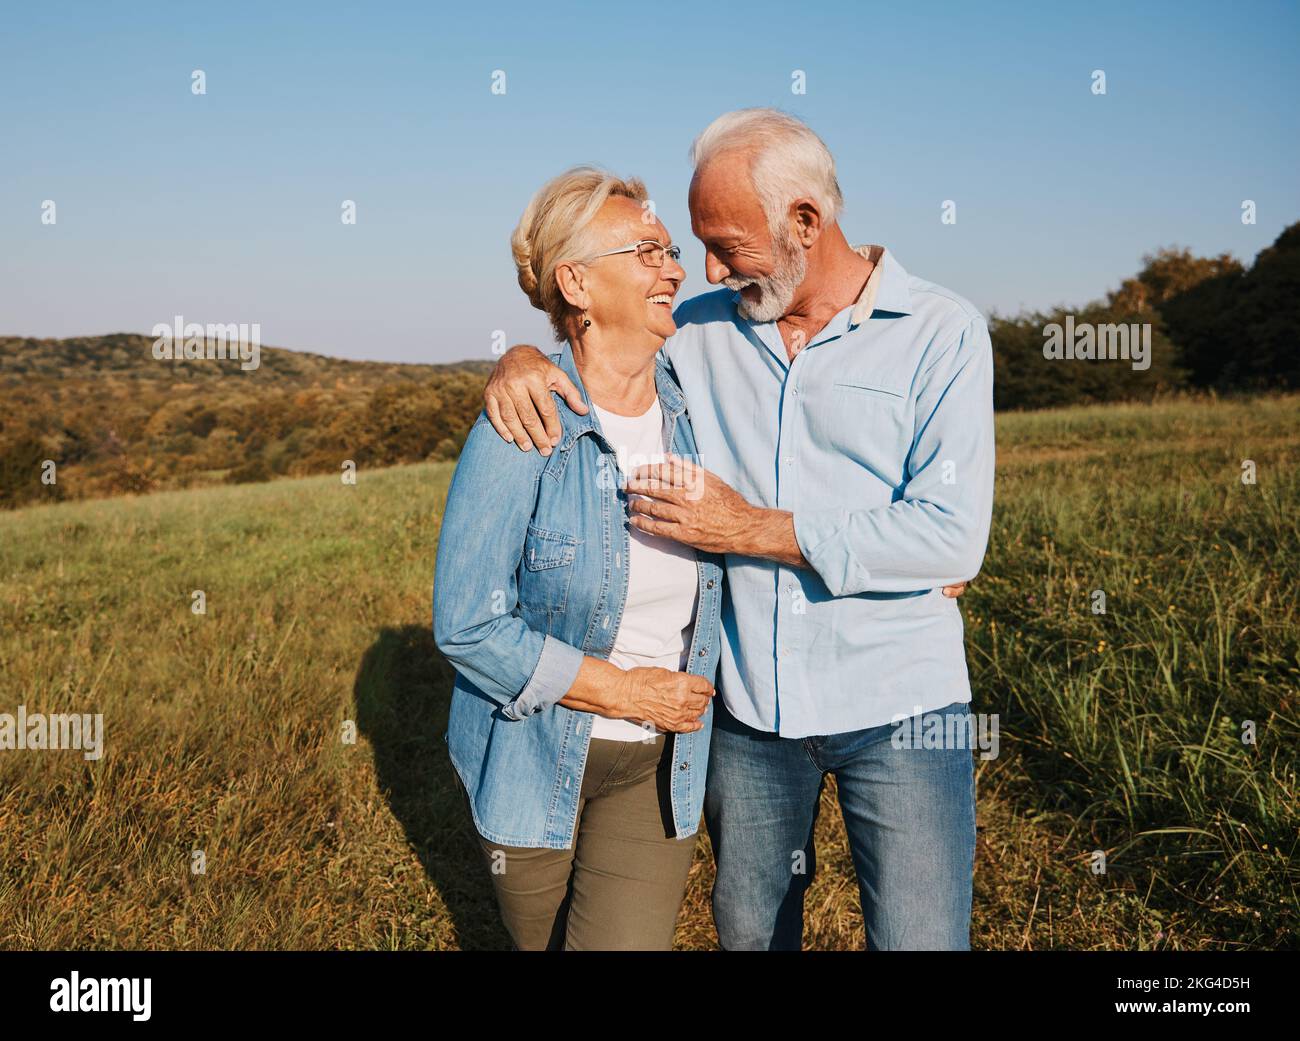 woman man outdoor senior couple happy lifestyle retirement together smiling love hug nature mature Stock Photo